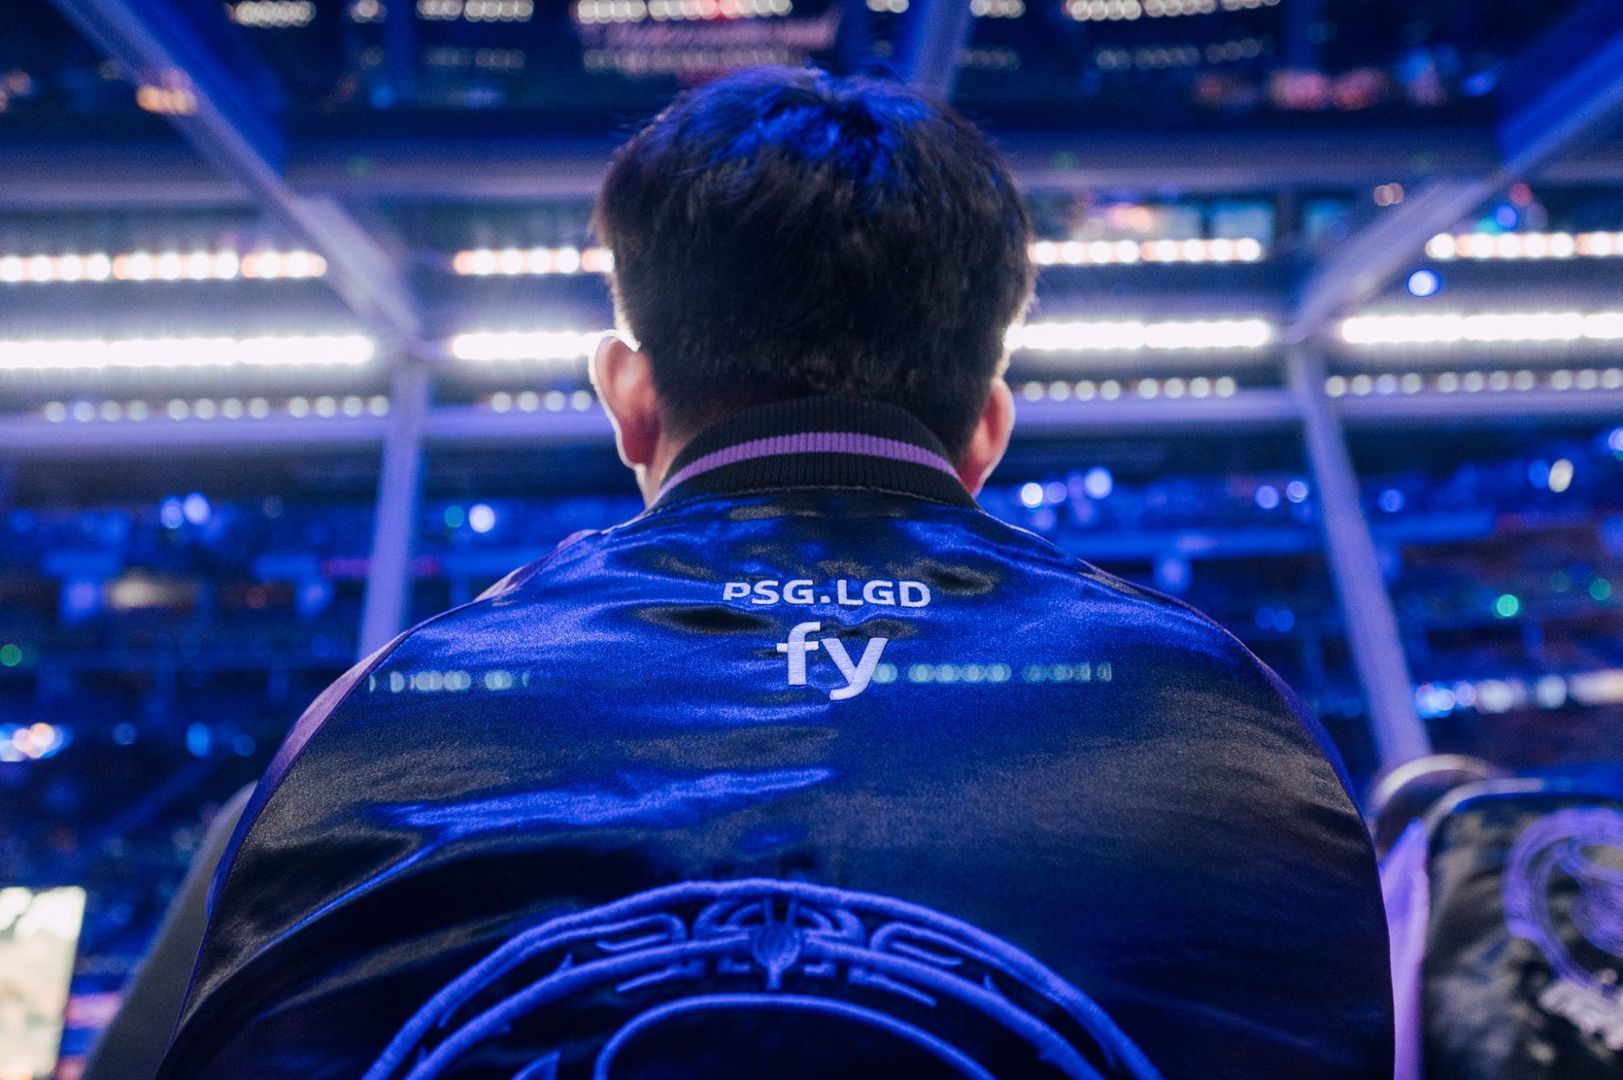 fy looks unstoppable in PSG.LGD's win over Invictus Gaming  ONE Esports